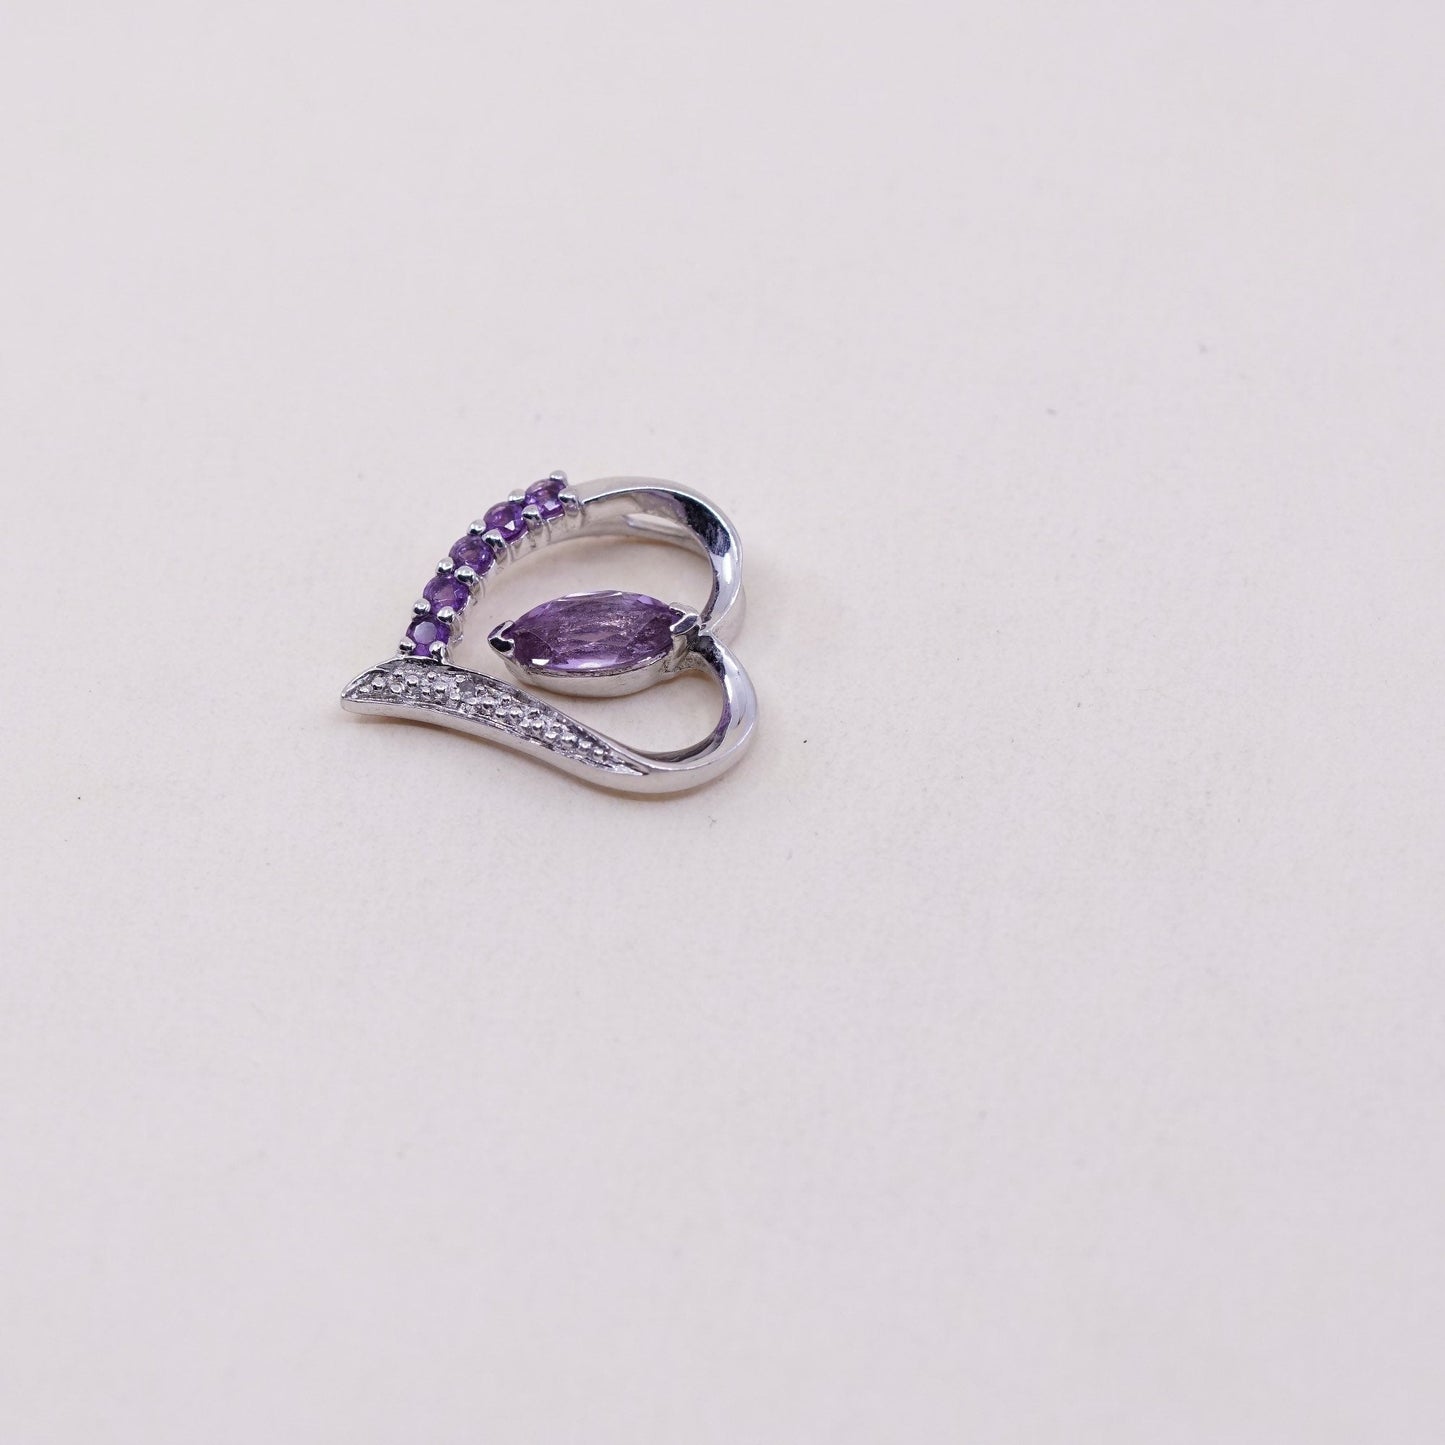 Vintage FD Sterling silver pendant, 925 with heart amethyst